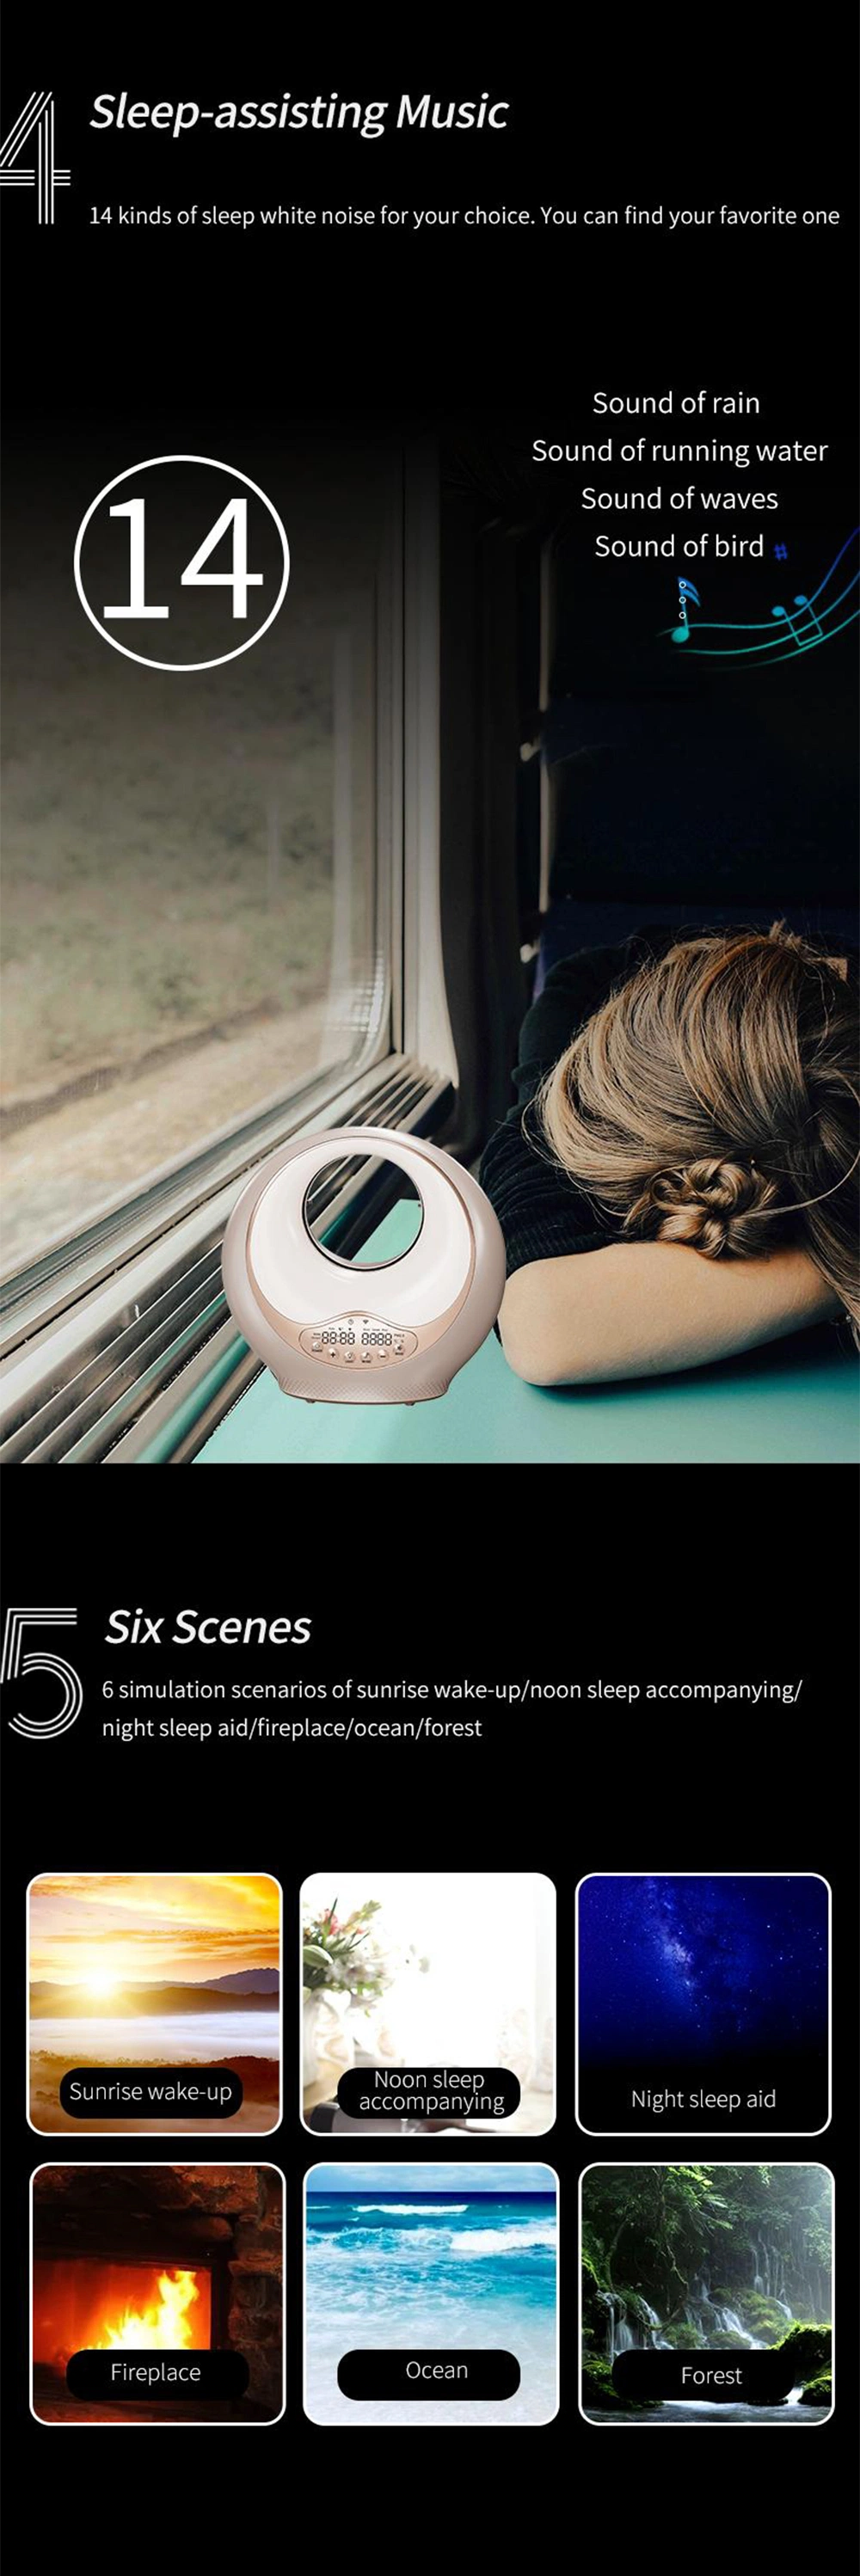 Sleep Aid Treat Insomnia Pulse Stimulation Bedroom Portable Sleep Aid Device Physical Therapy Equipments